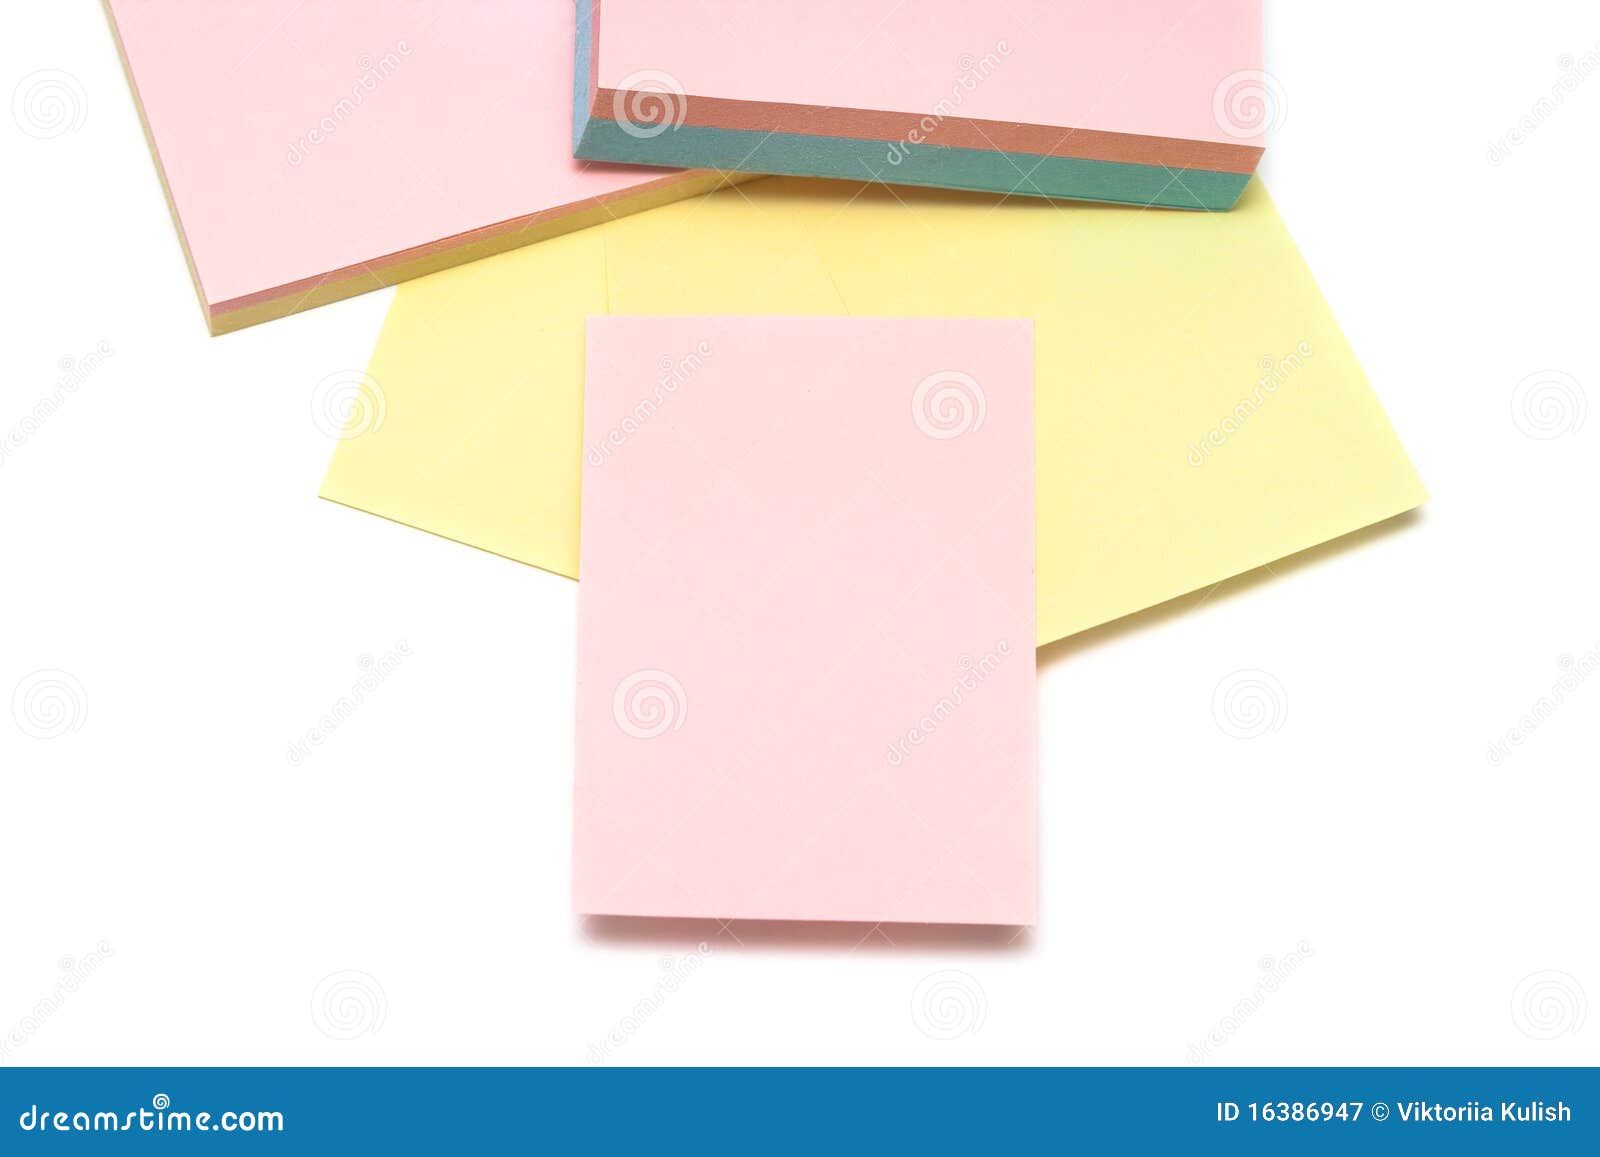 Colored pages of notebook stock image. Image of calligraphy - 16386947